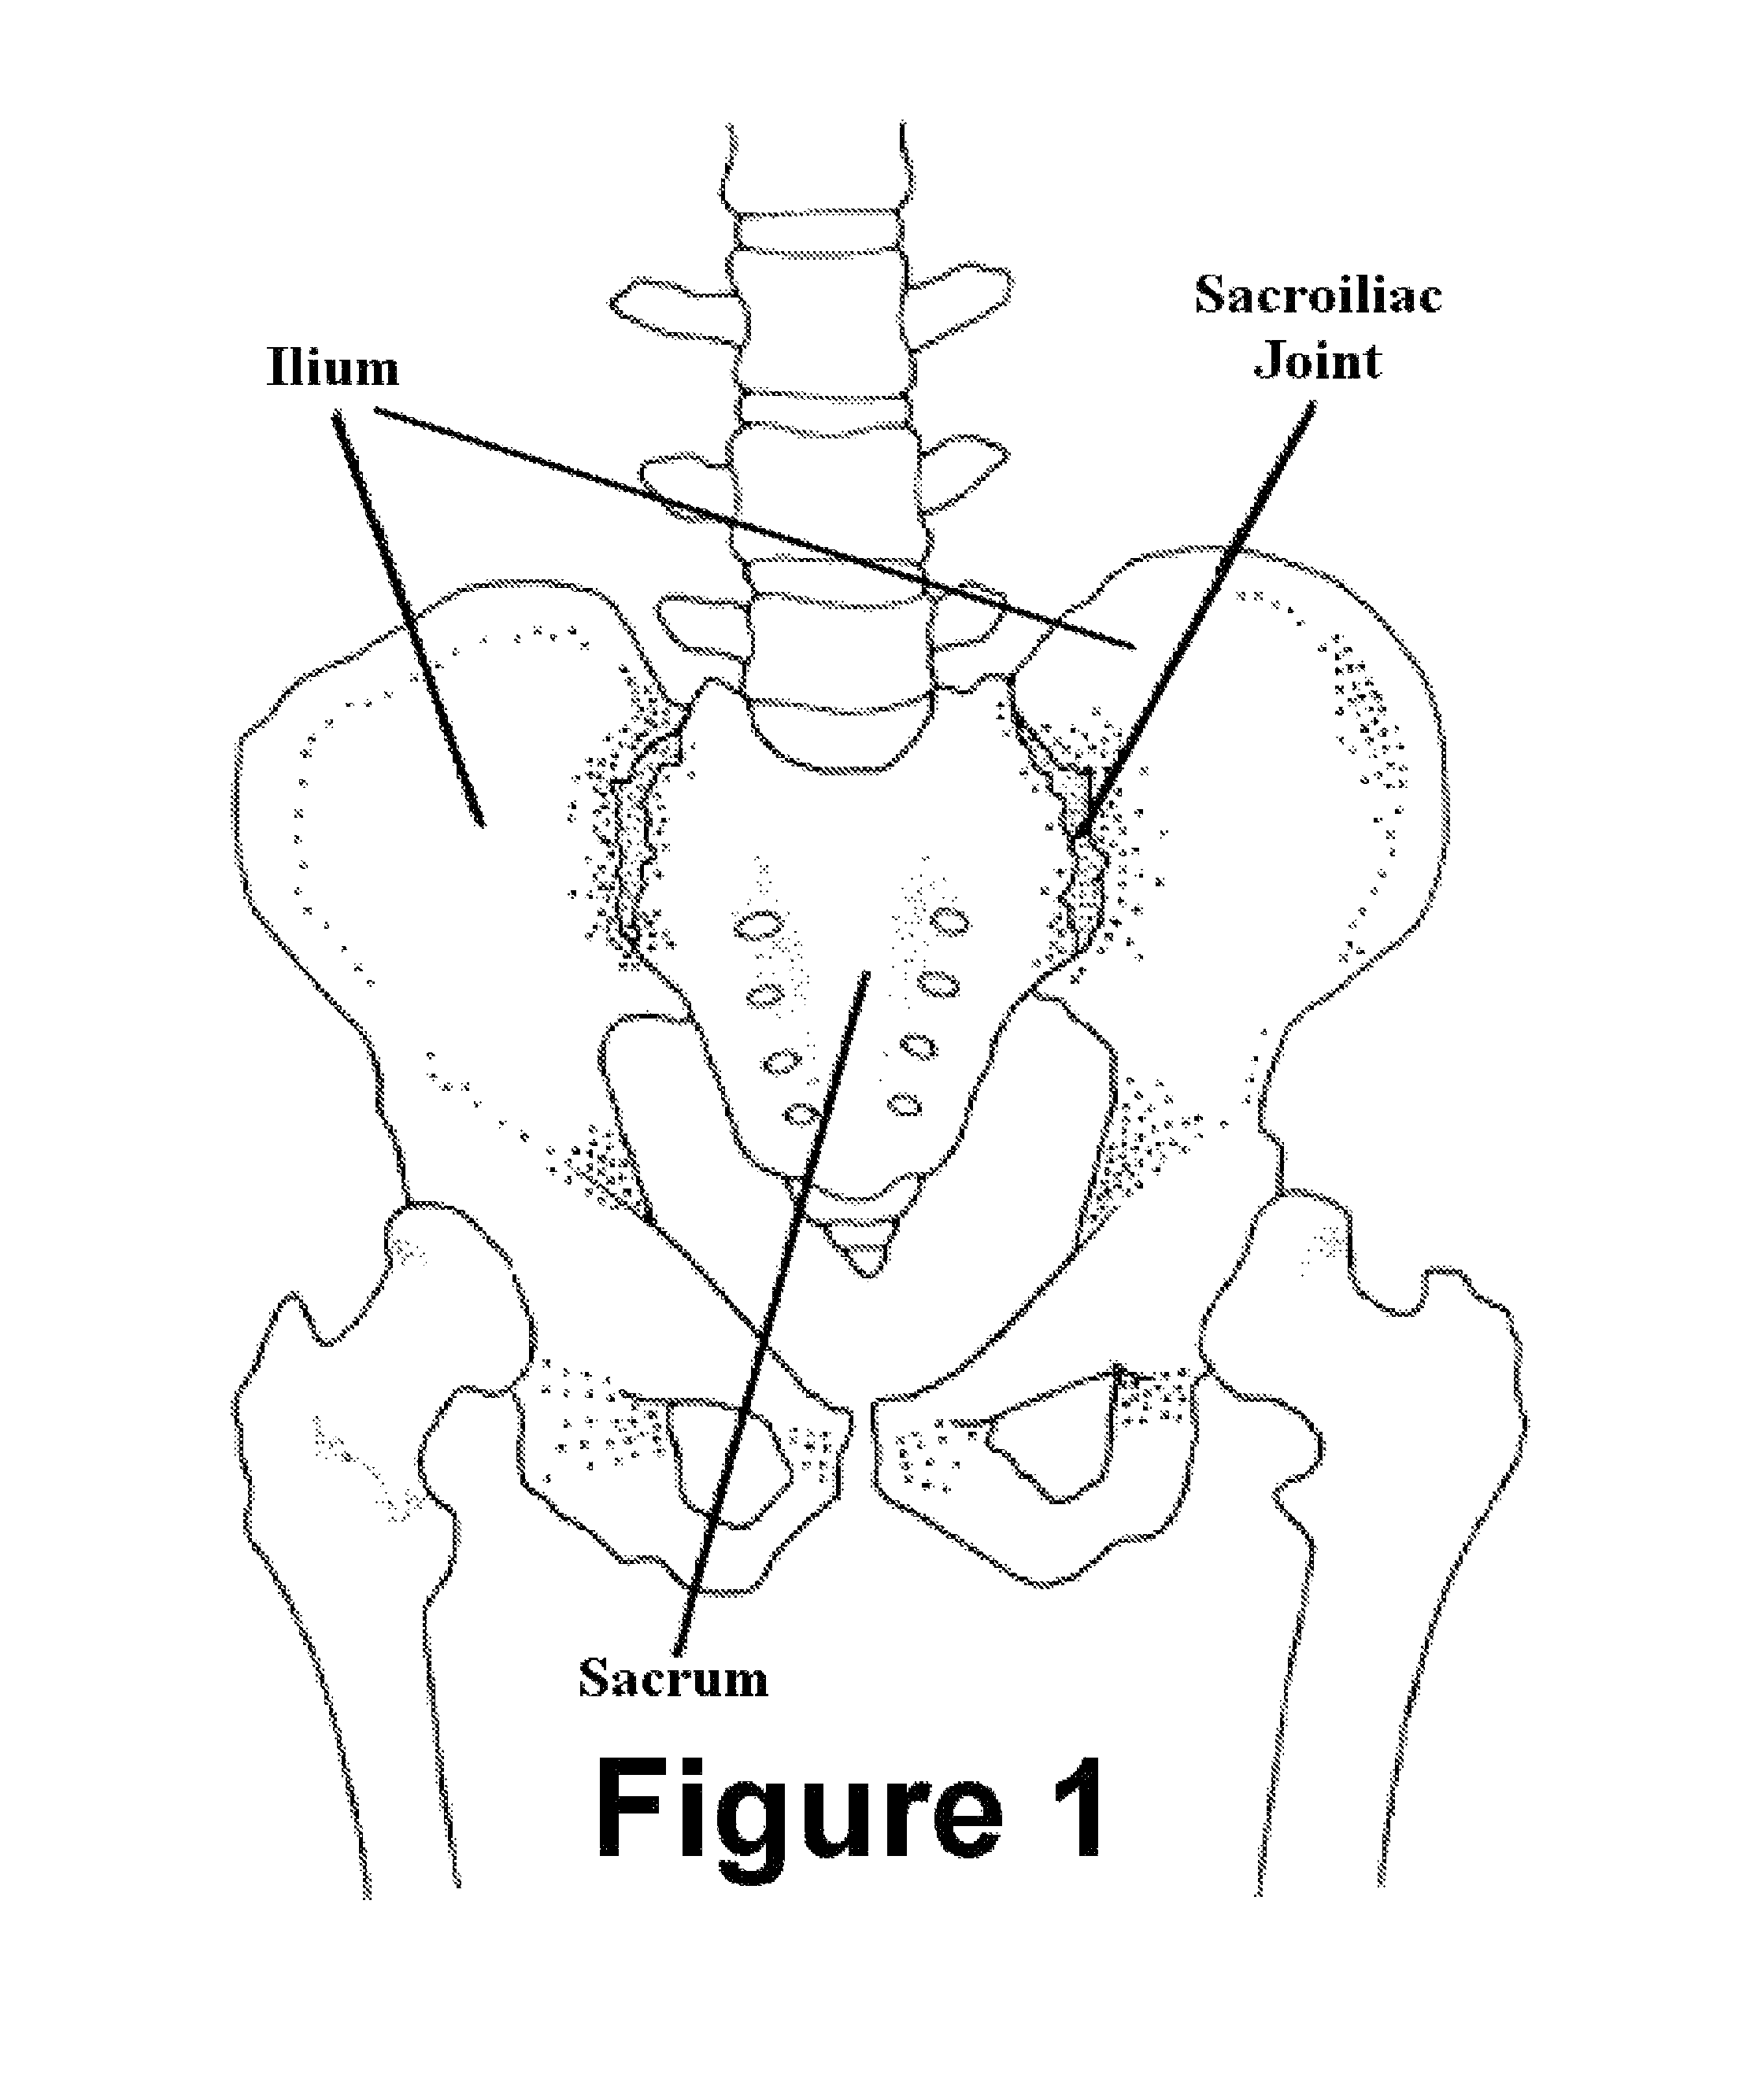 Method and apparatus for minimally invasive treatment of unstable pelvic ring injuries combined with hip arthroplasty